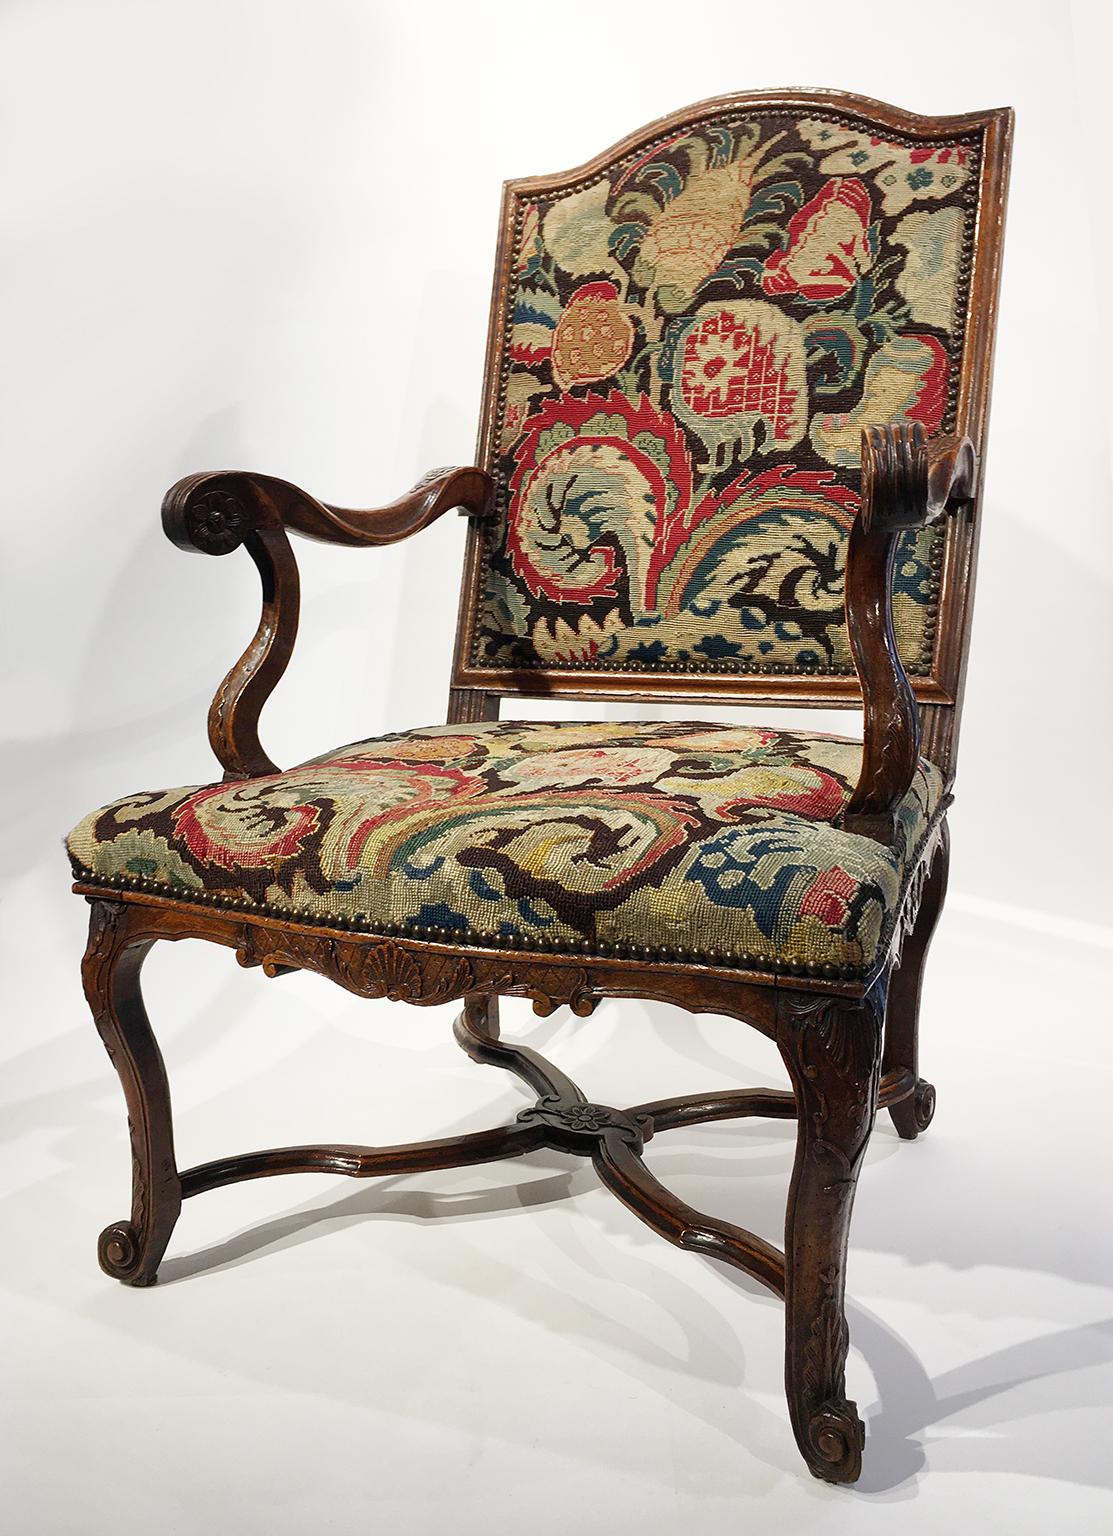 Pair of French armchairs à la Reine from the Régence period with 